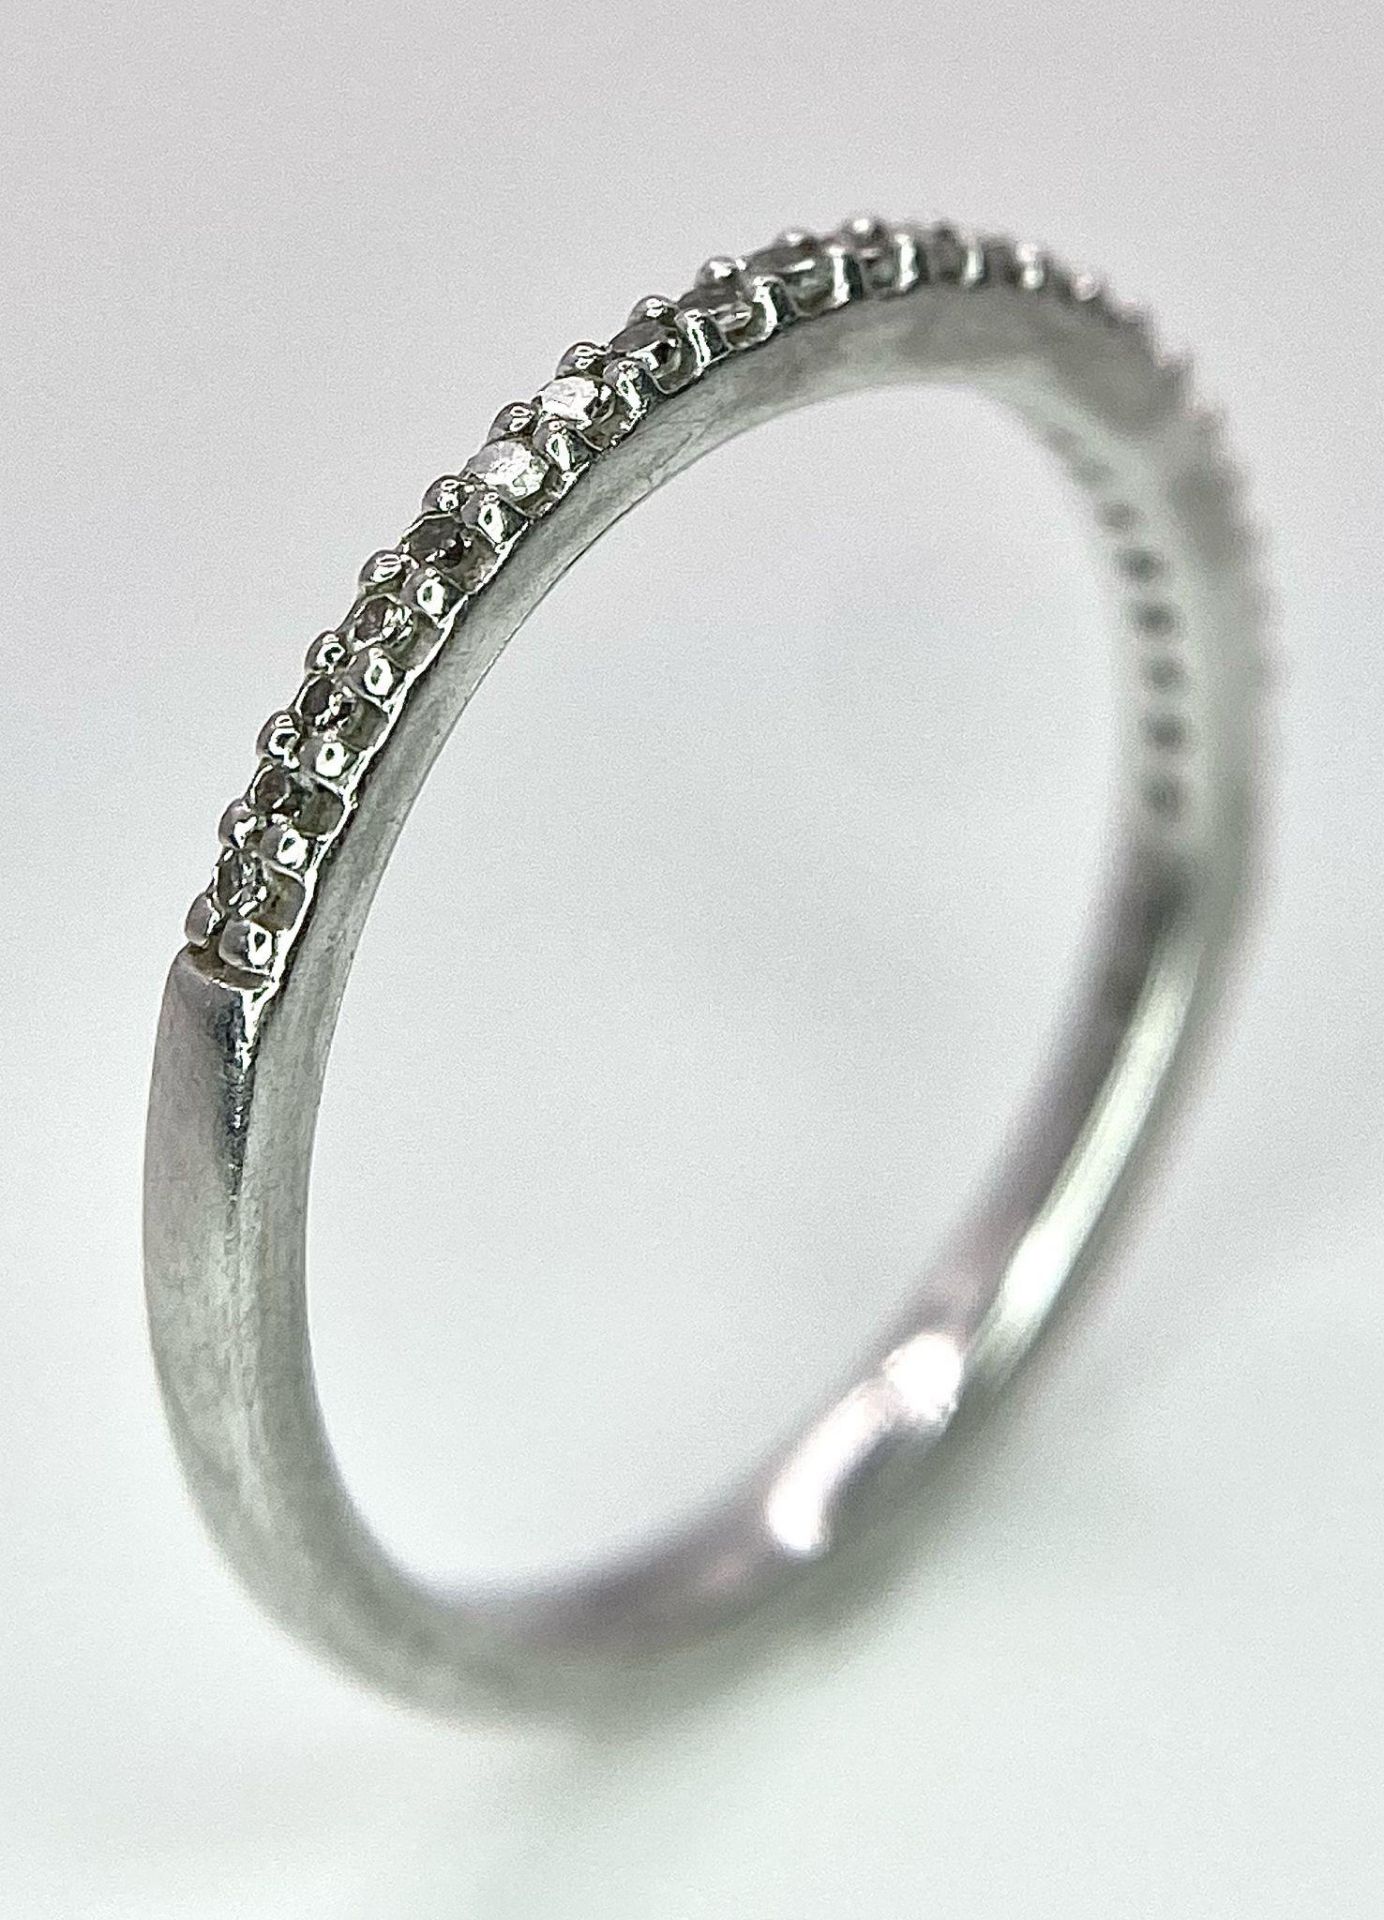 A 950 PLATINUM DIAMOND SET BAND RING. TOTAL WEIGHT 2.5G. SIZE K - Image 3 of 6